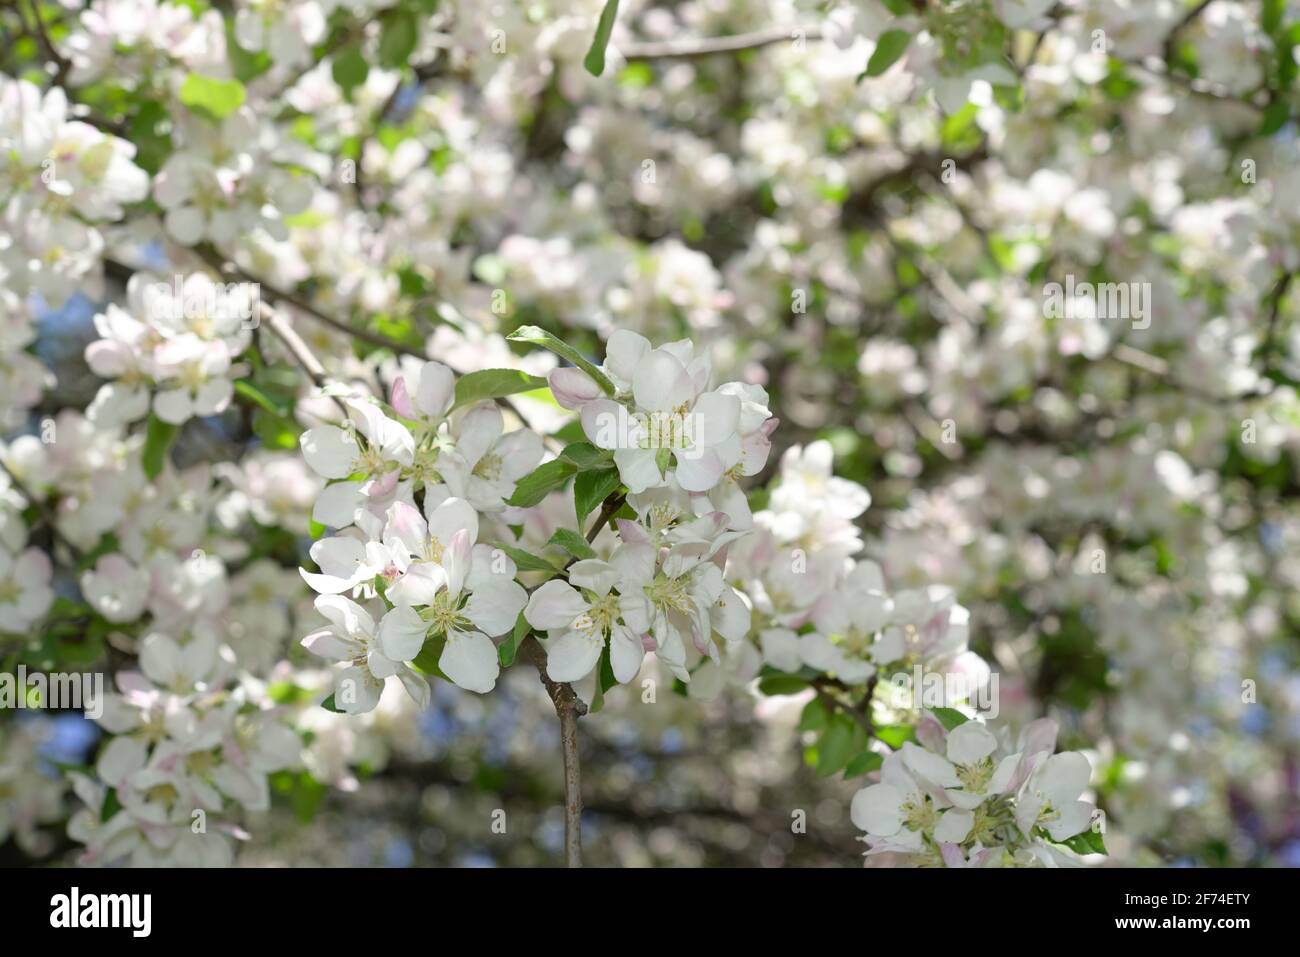 apple blossoms close up Stock Photo